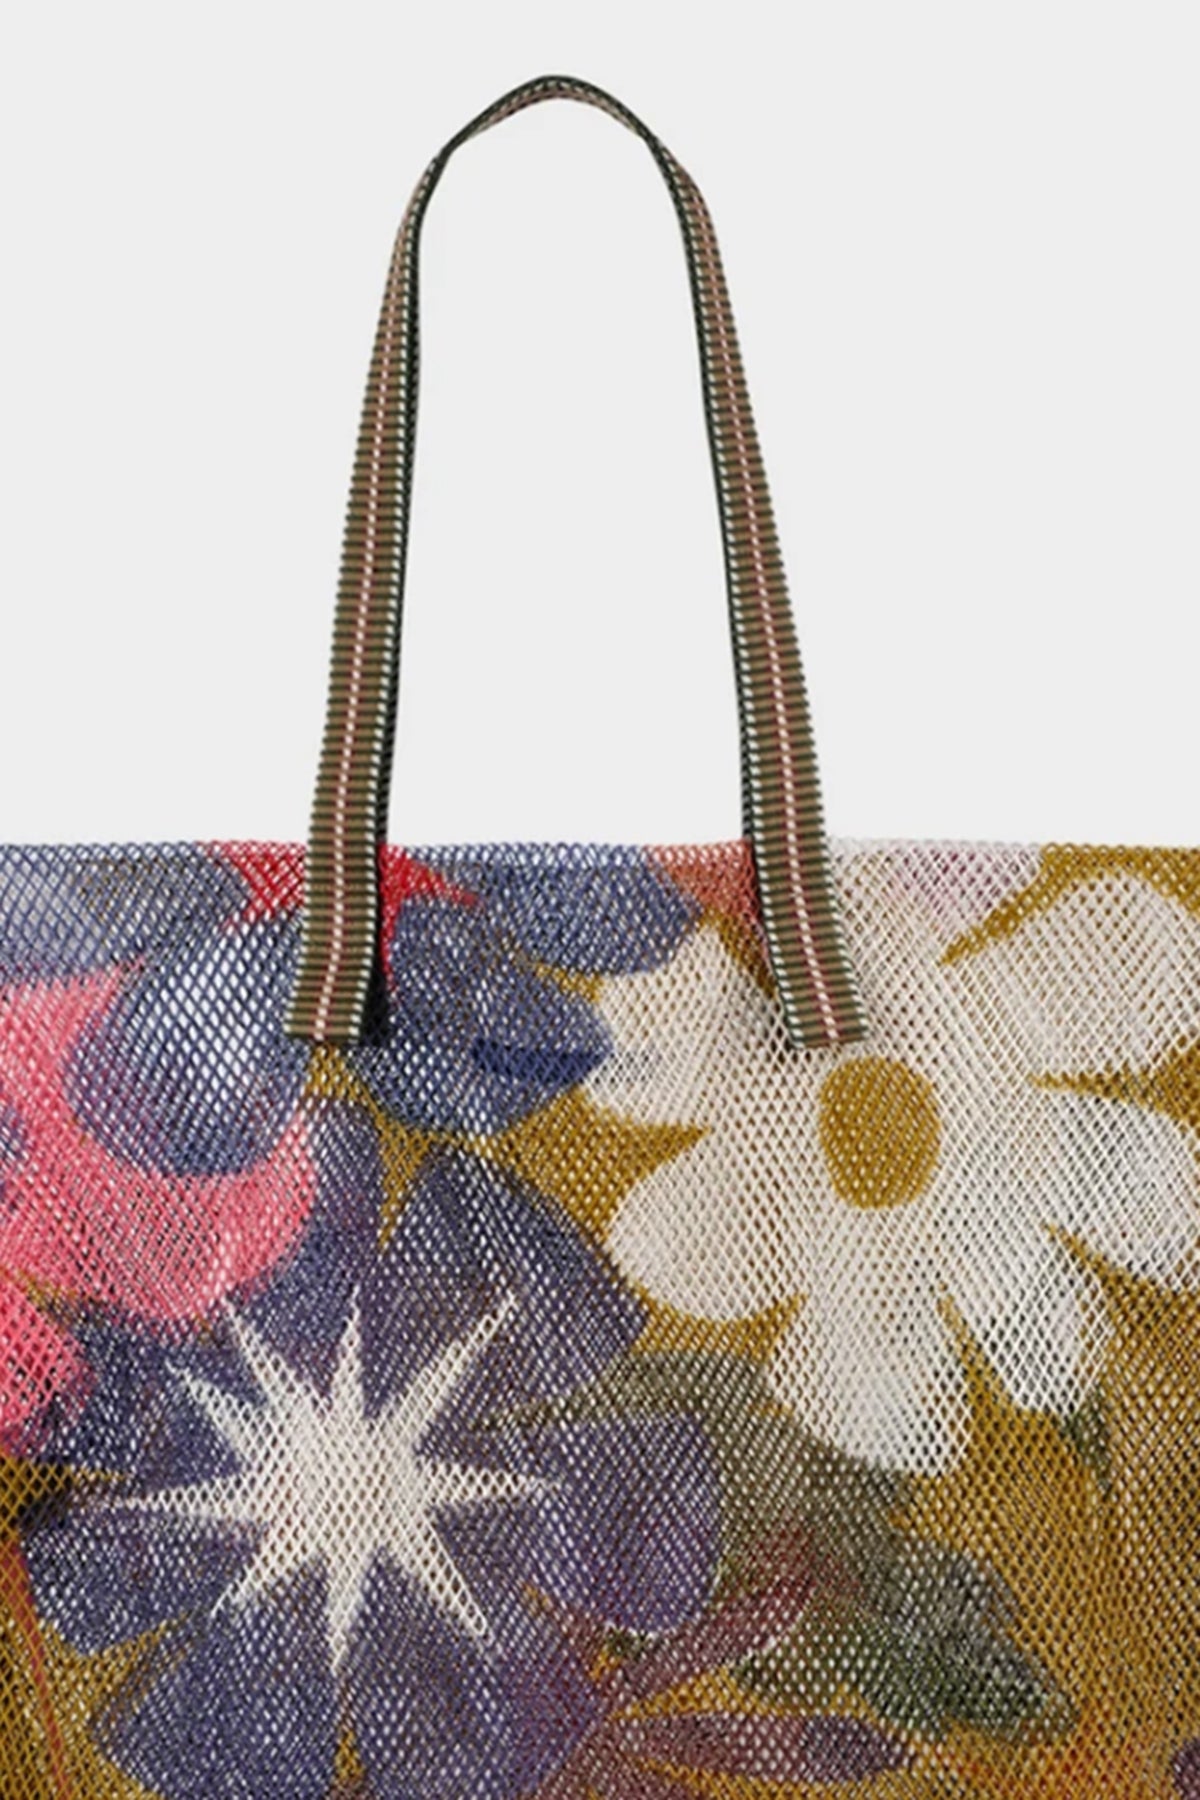 Striped handle detail on small mesh tote with olive background and large multi colored flowers.-24555117740225